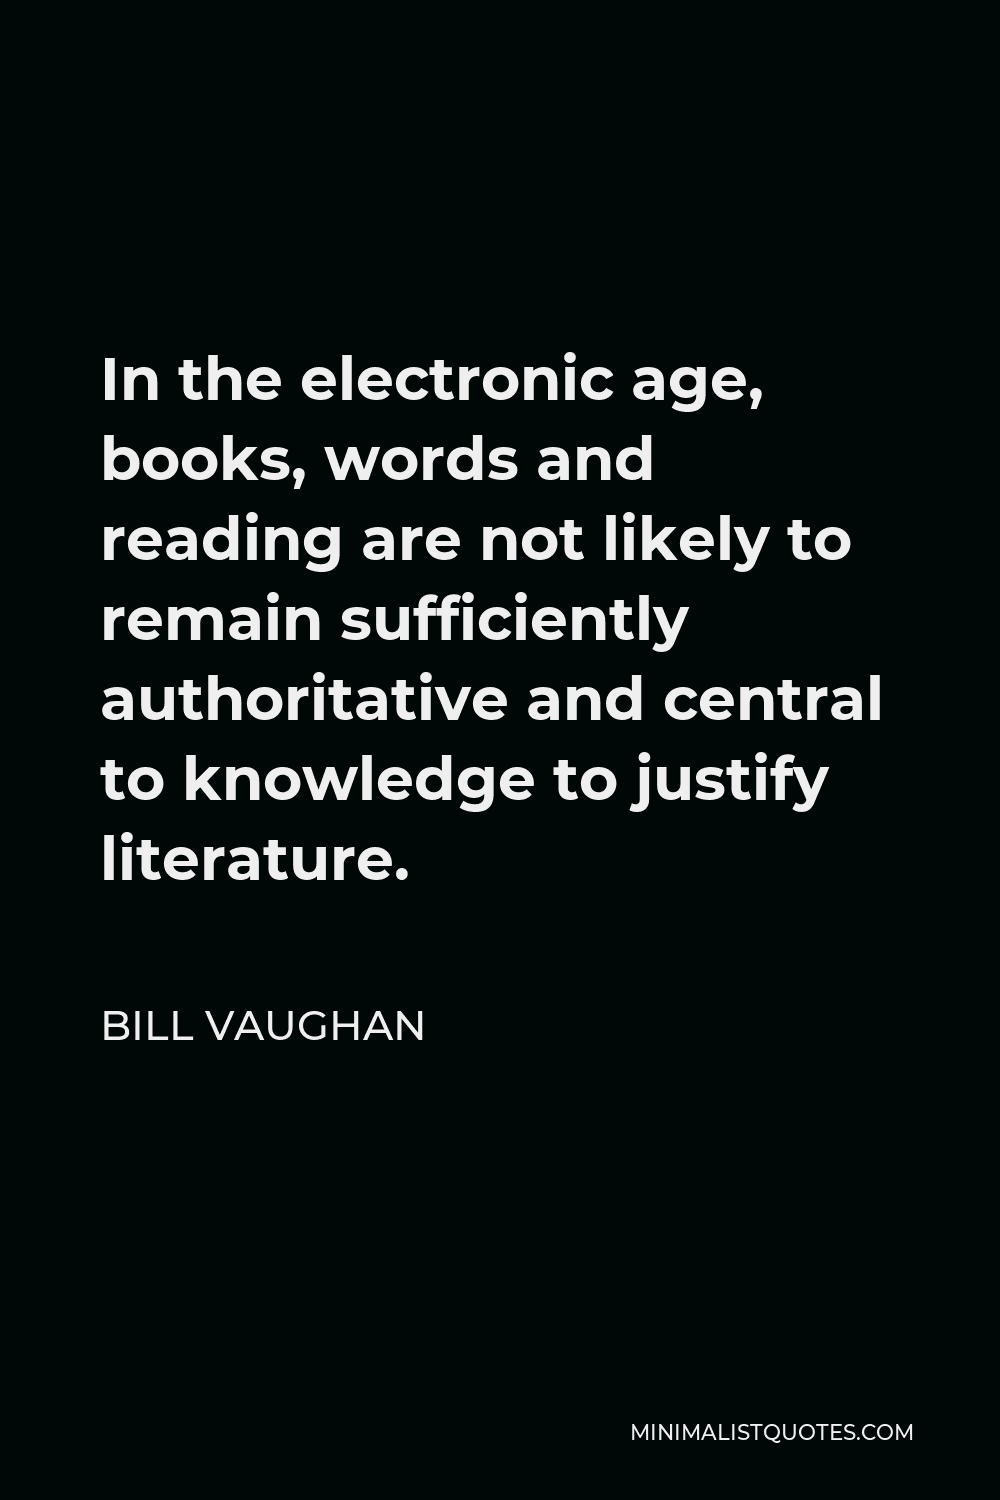 Bill Vaughan Quote - In the electronic age, books, words and reading are not likely to remain sufficiently authoritative and central to knowledge to justify literature.